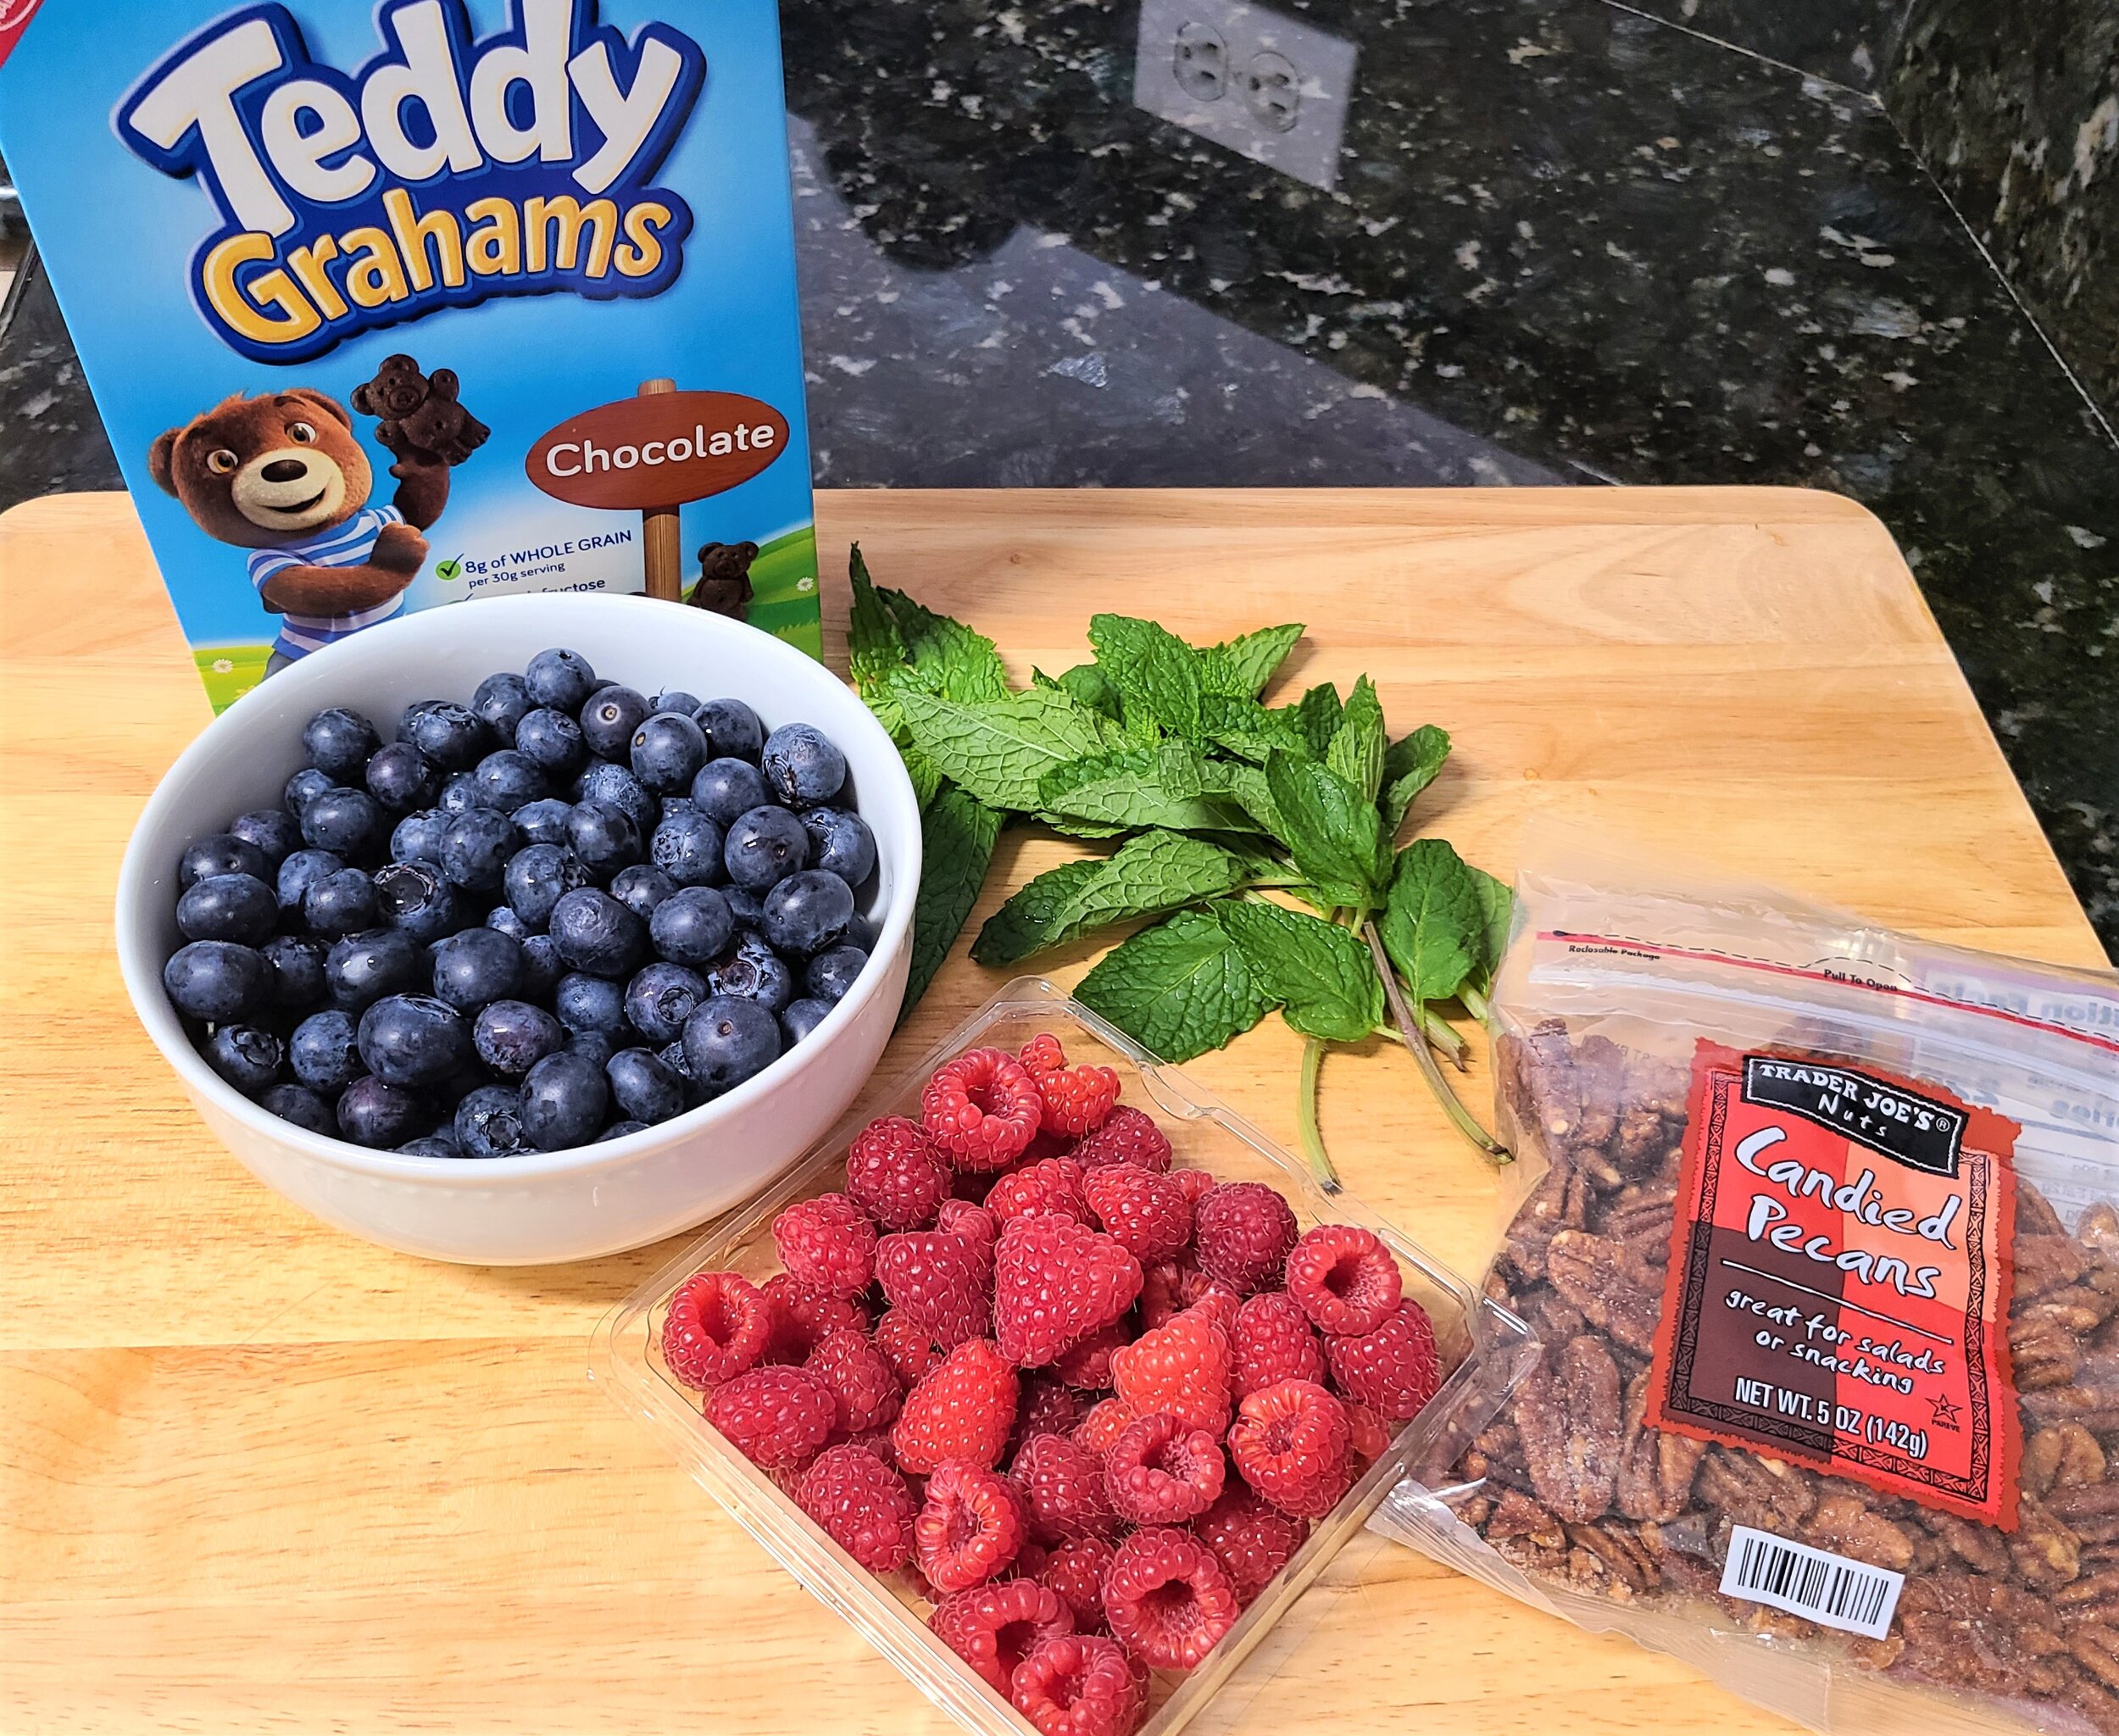 blueberries, strawberries, almonds, teddy grahams, and mint